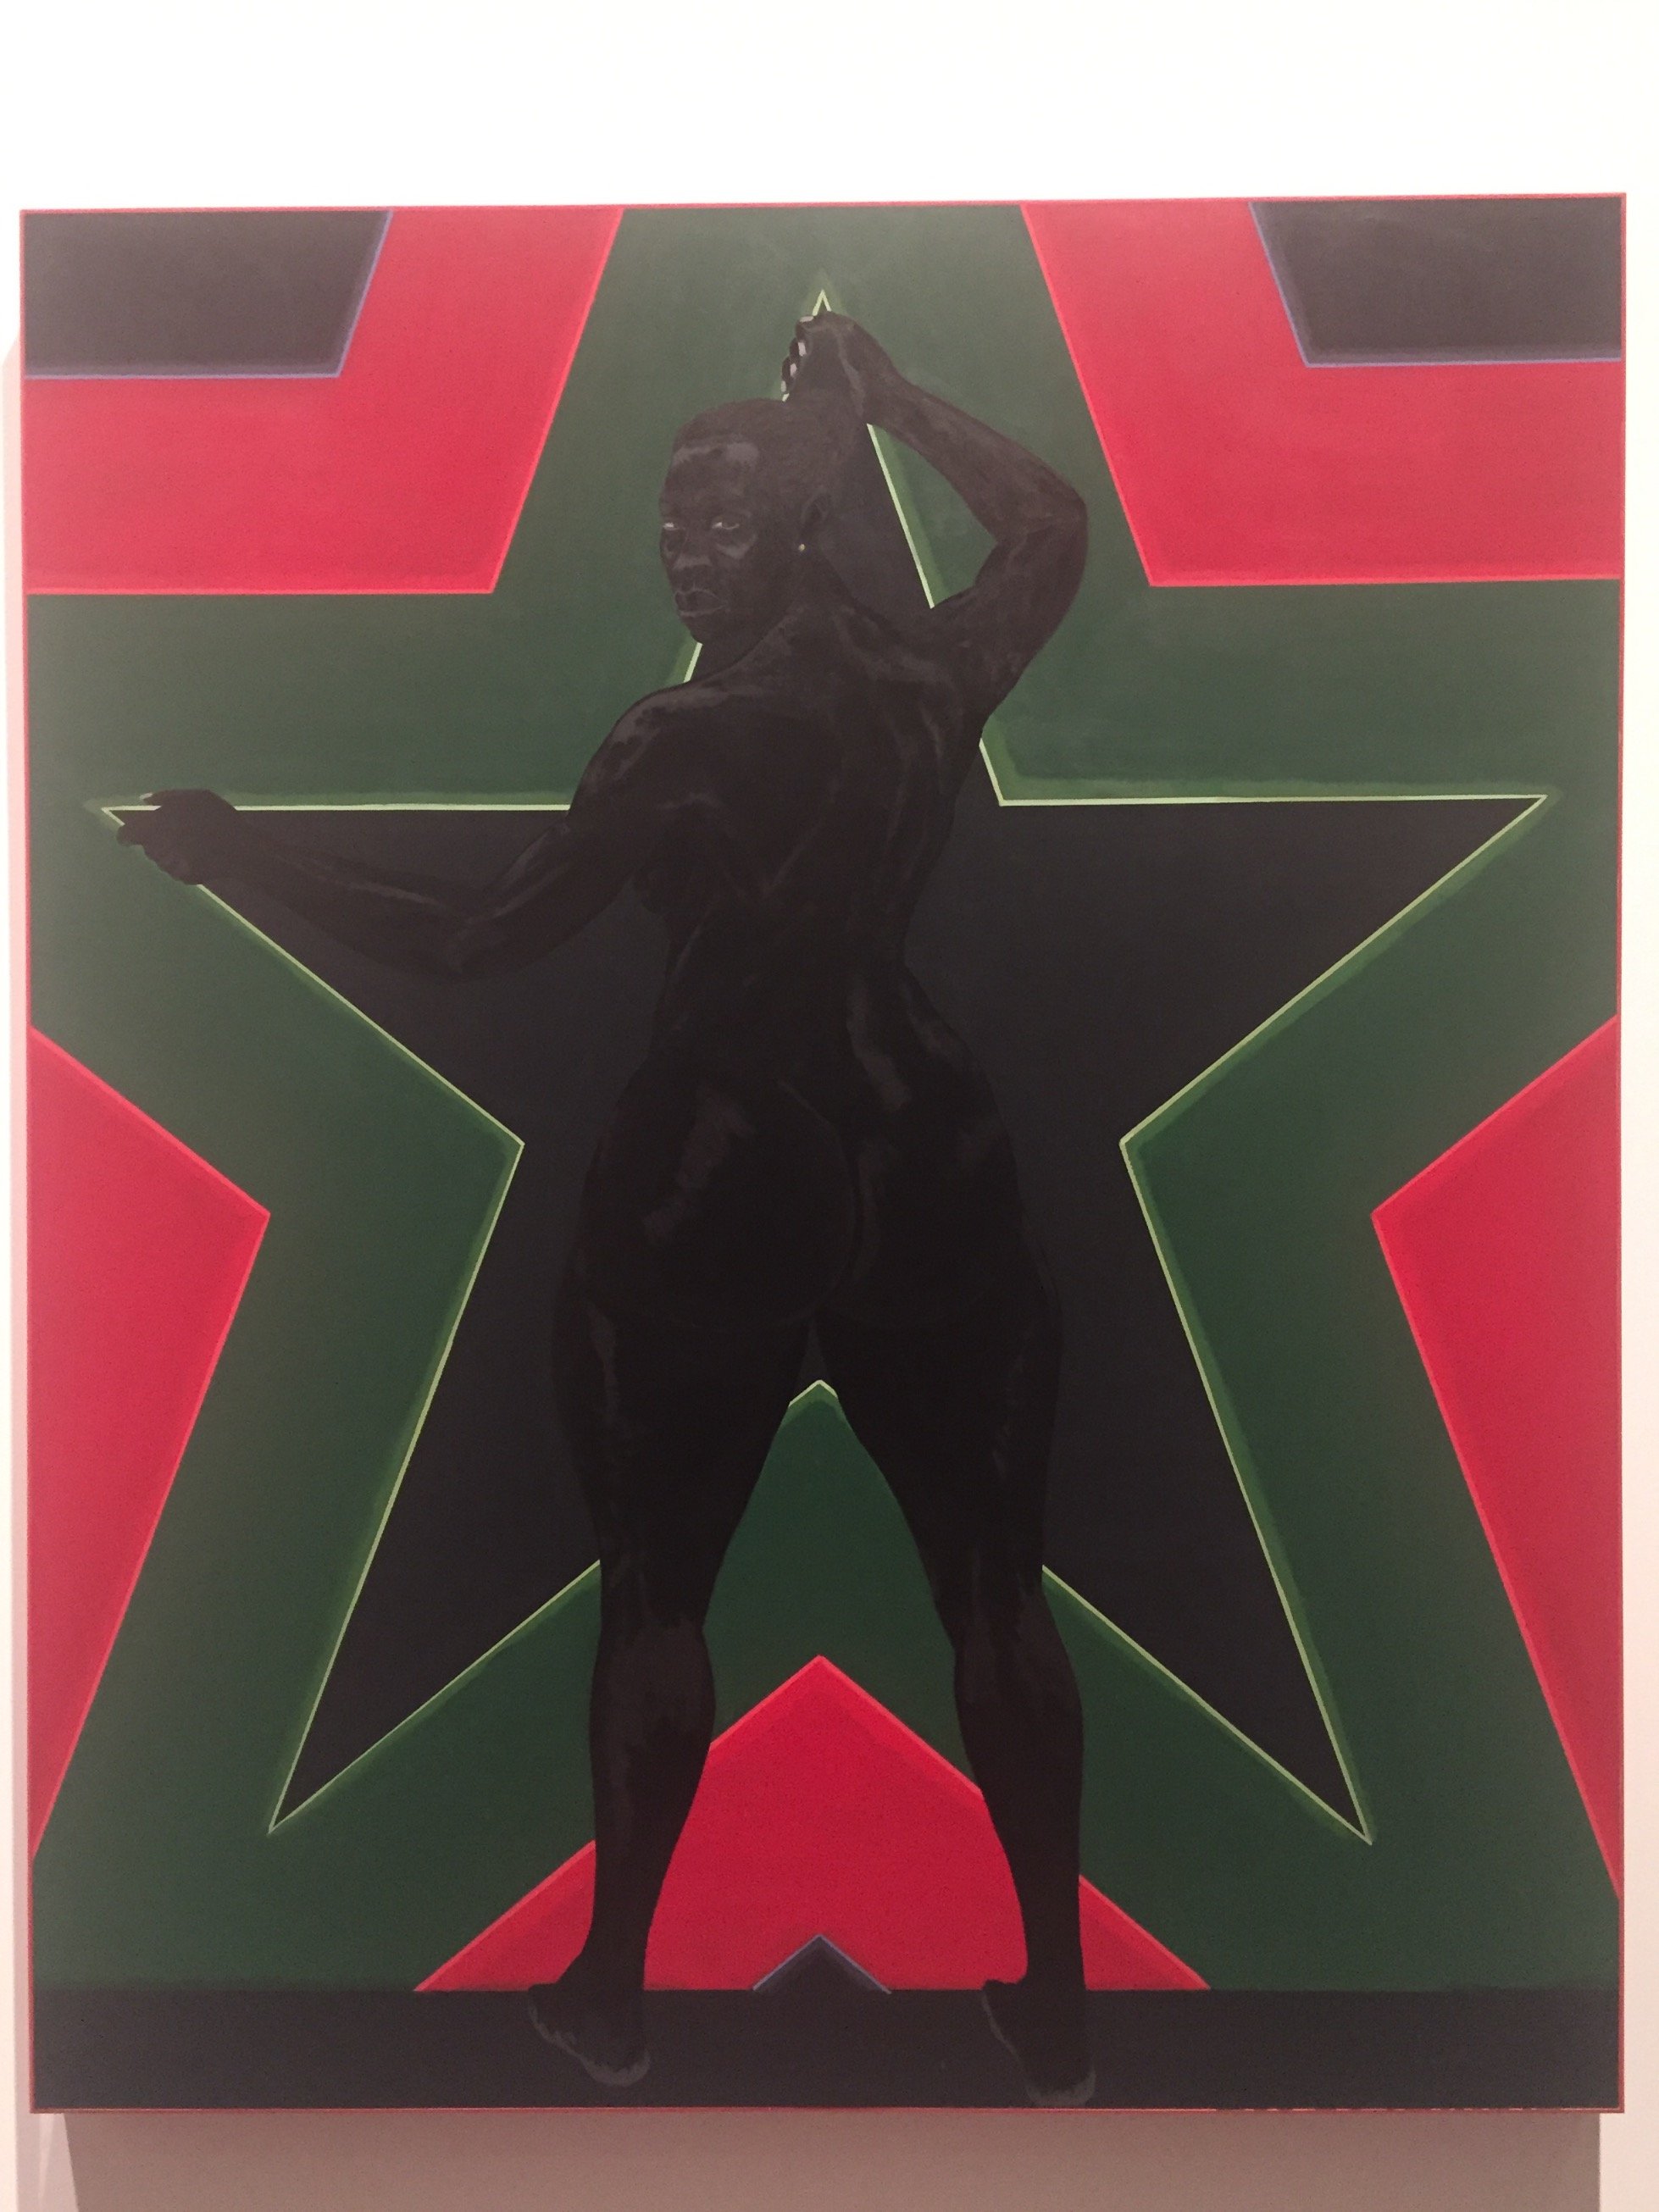 (image: “Black Star” by Kerry James Marshall)